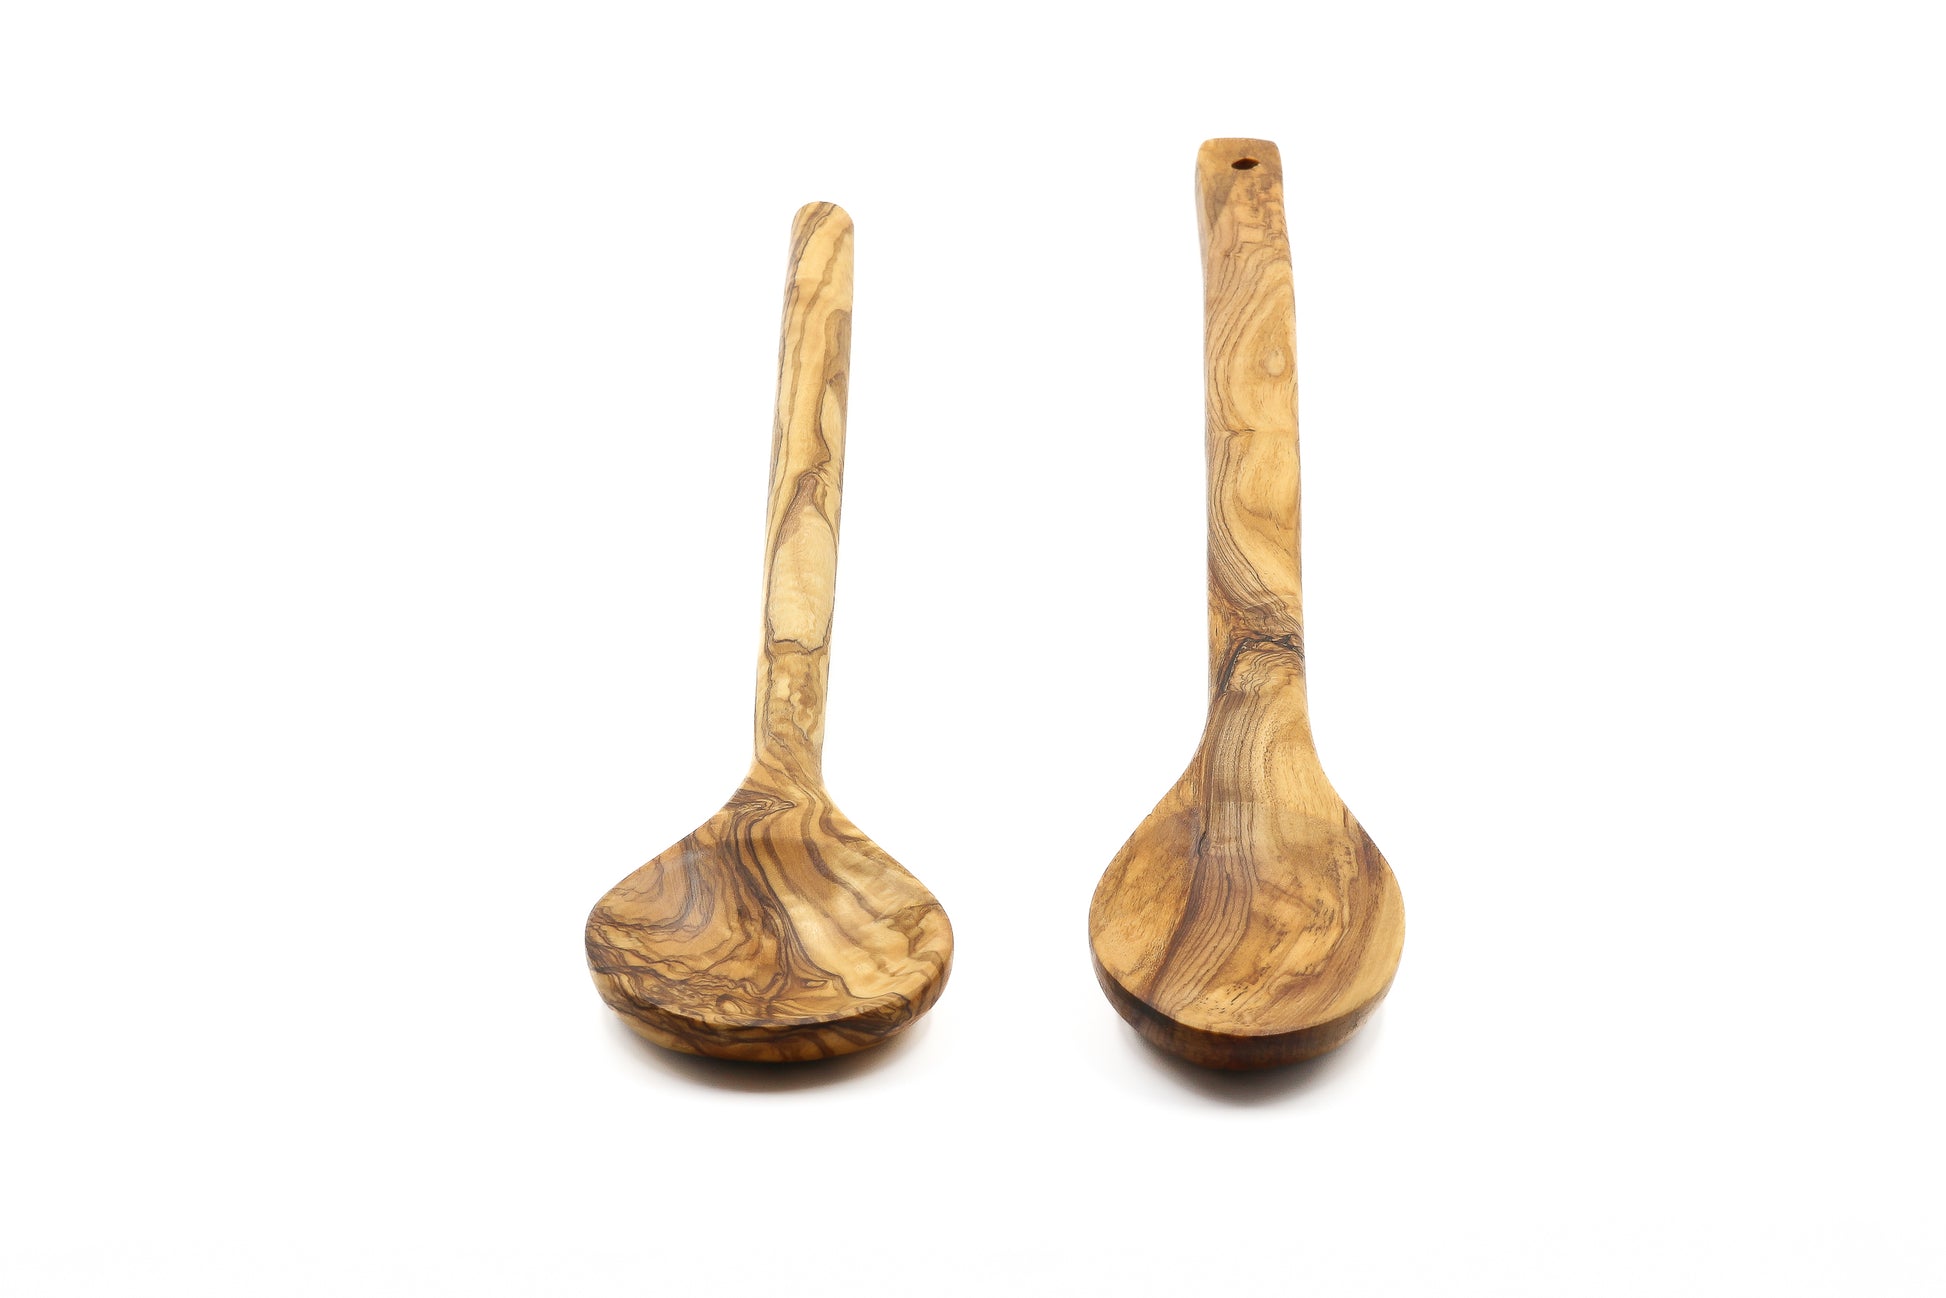 Enhance your culinary skills with this olive wood cooking spoon